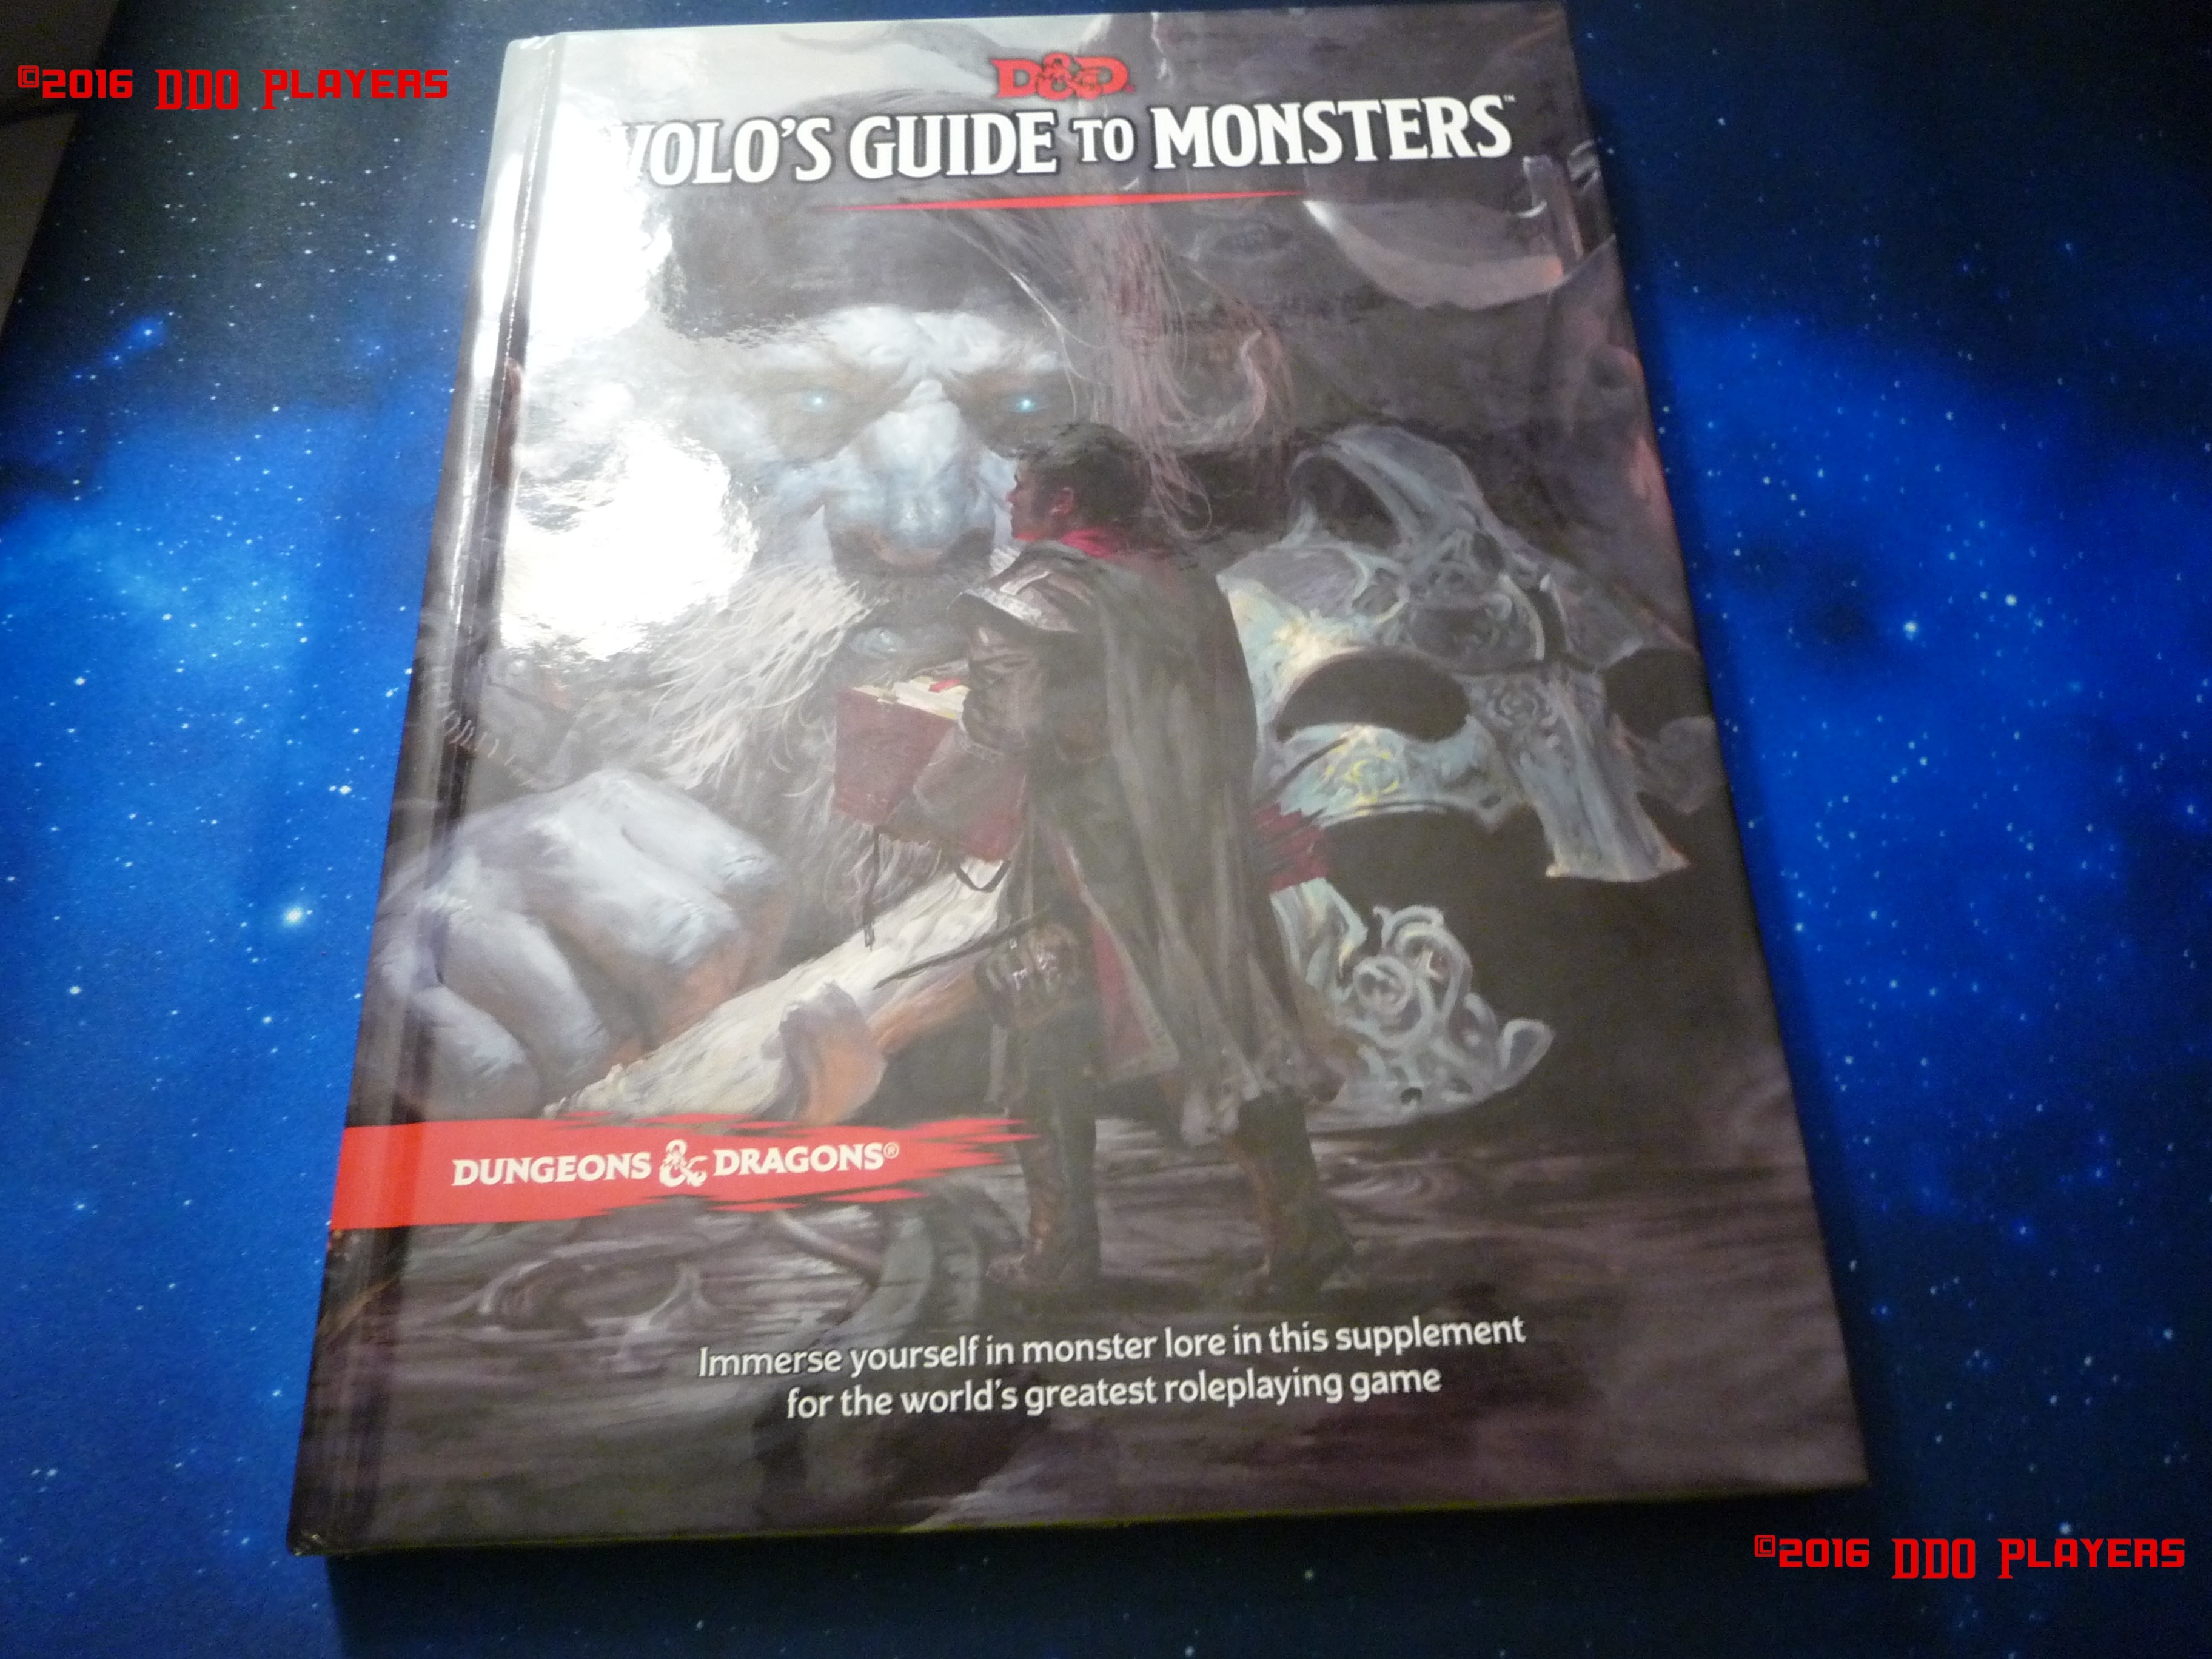 Volo's Guide to Monsters